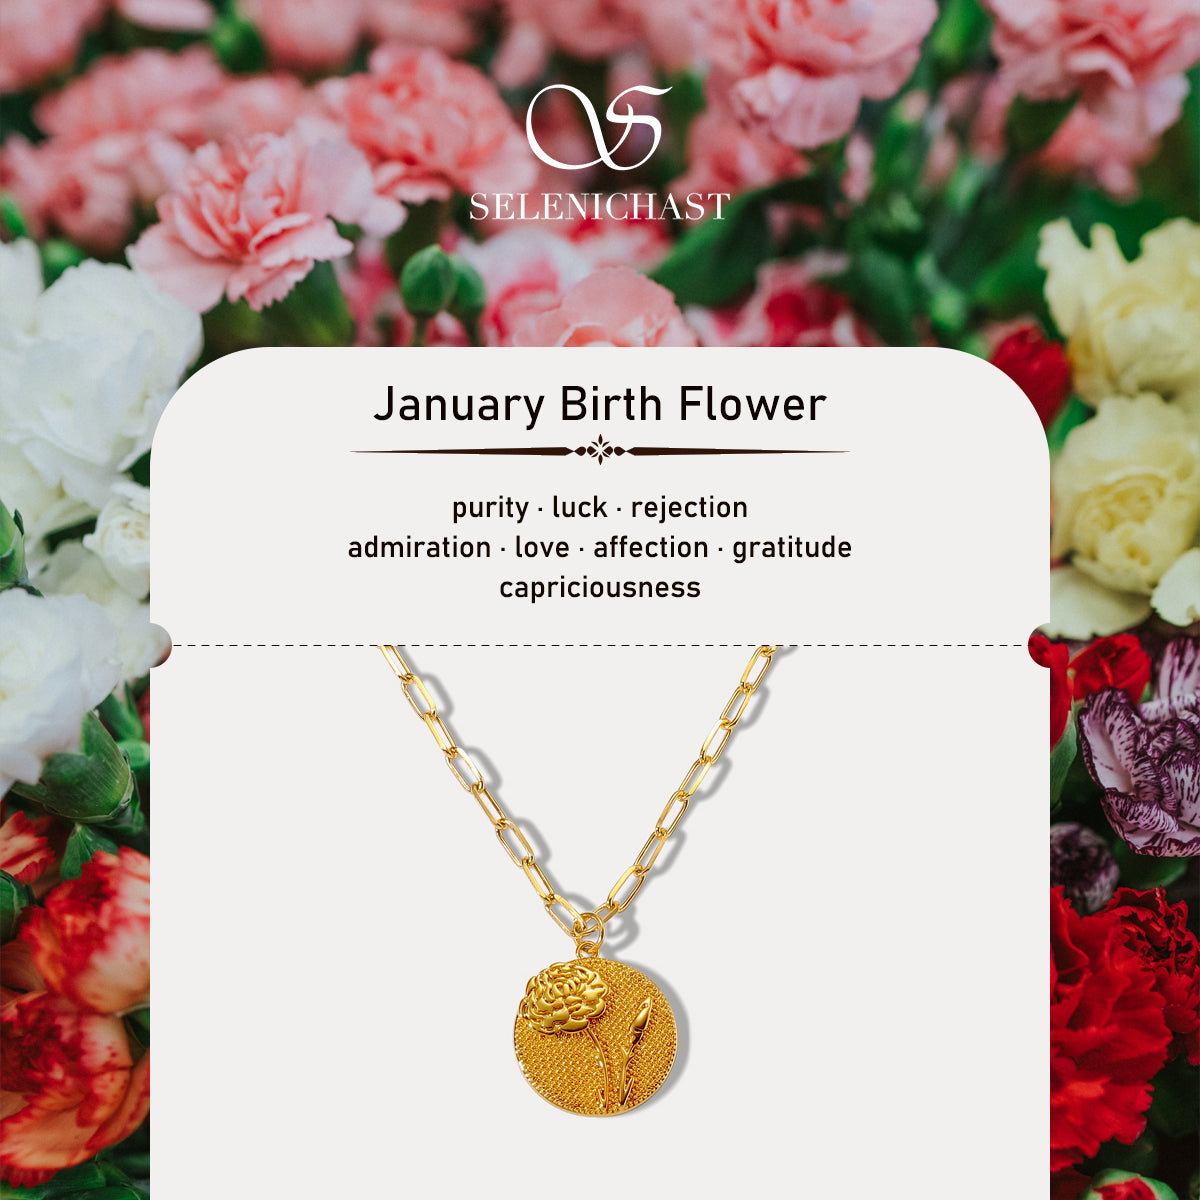 purity floral pendant carnation necklace january